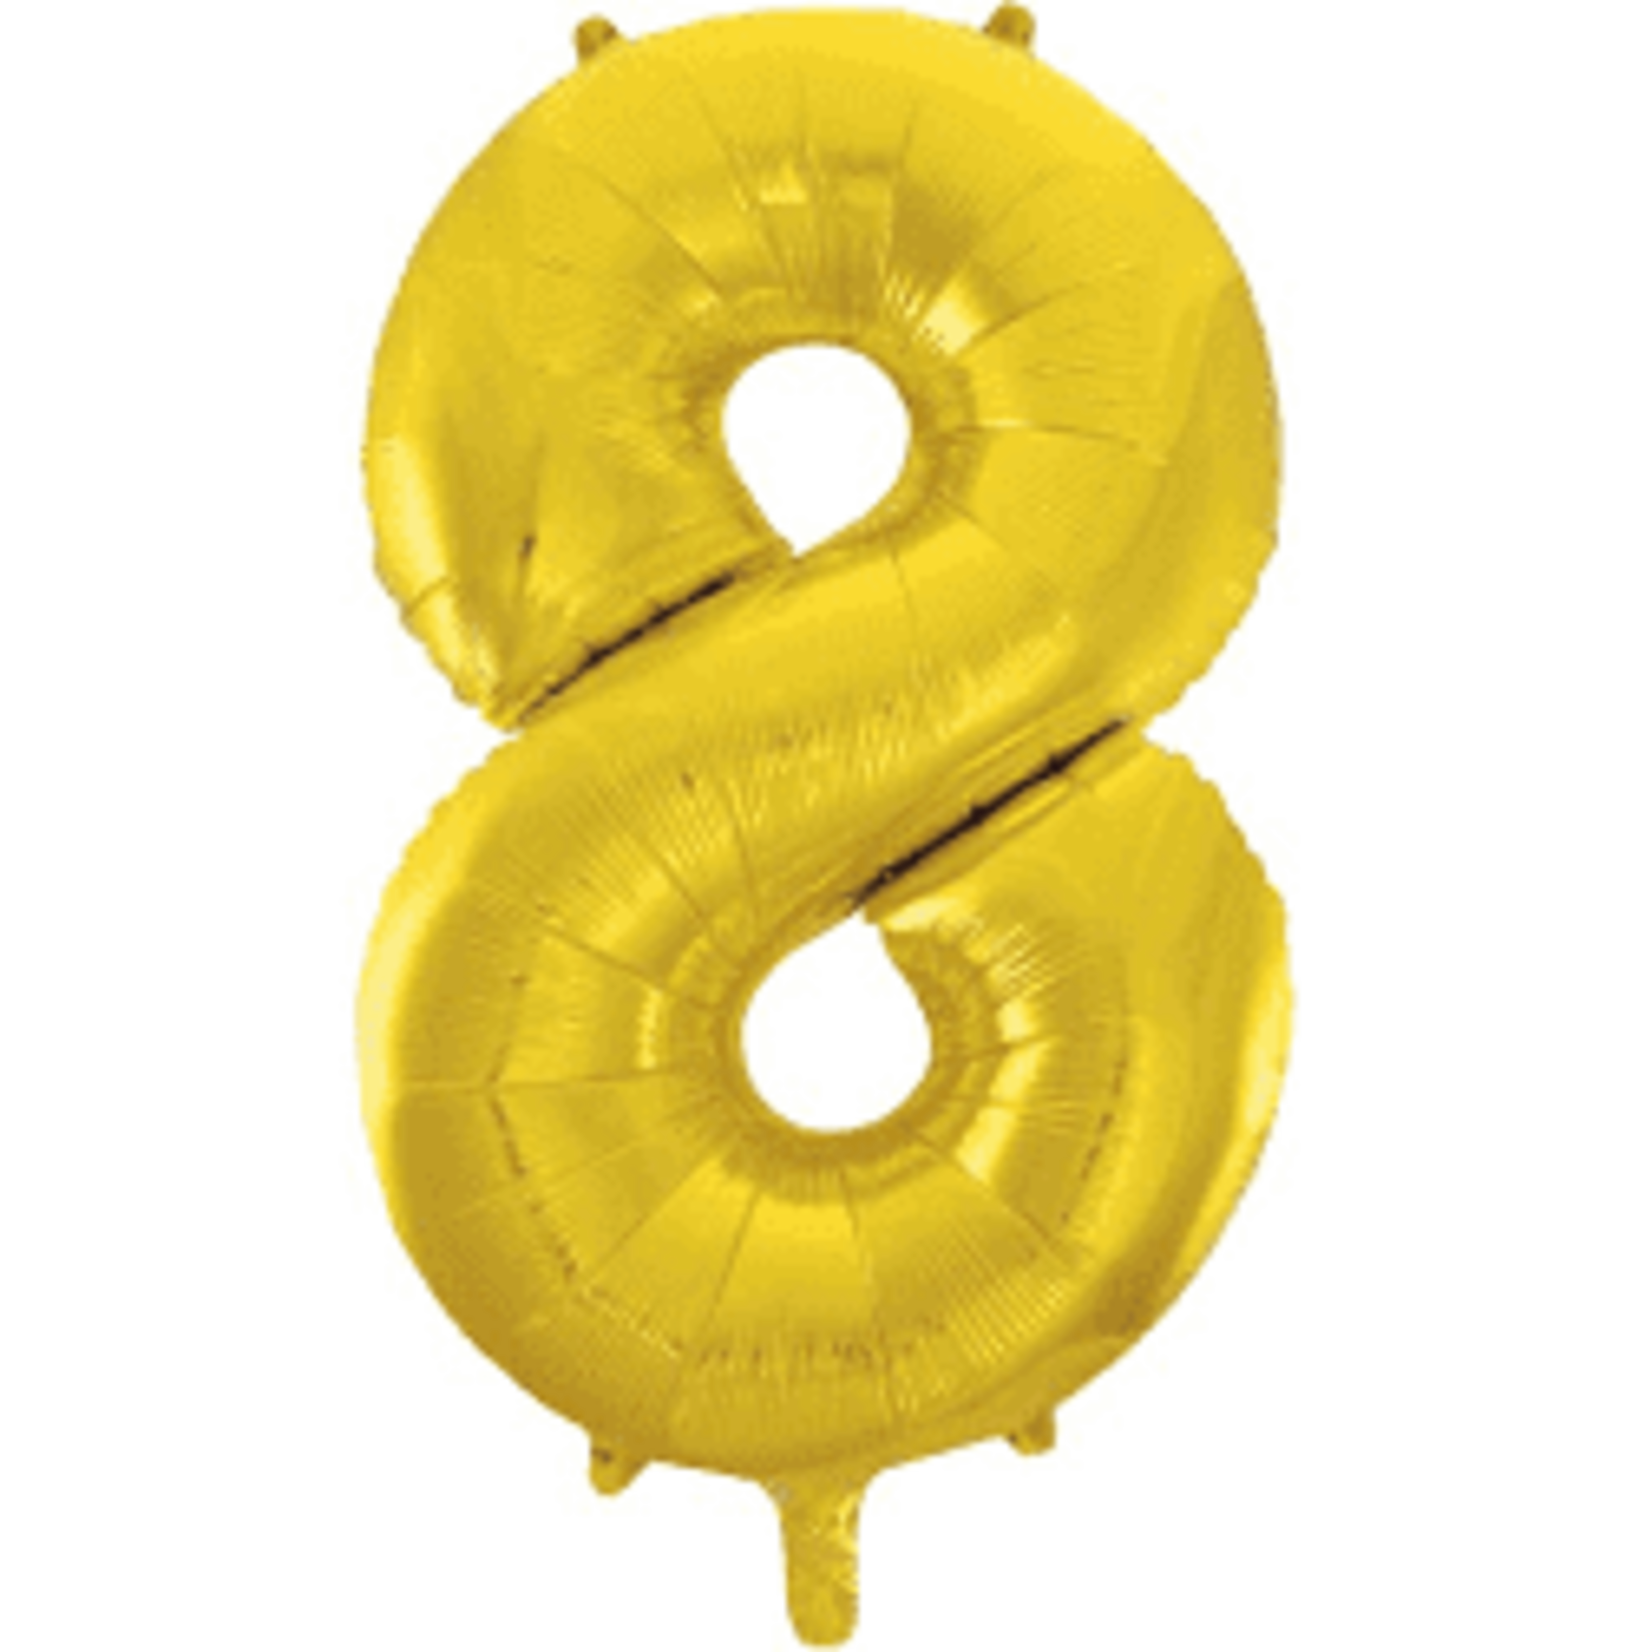 16" Number 8 Gold Balloon